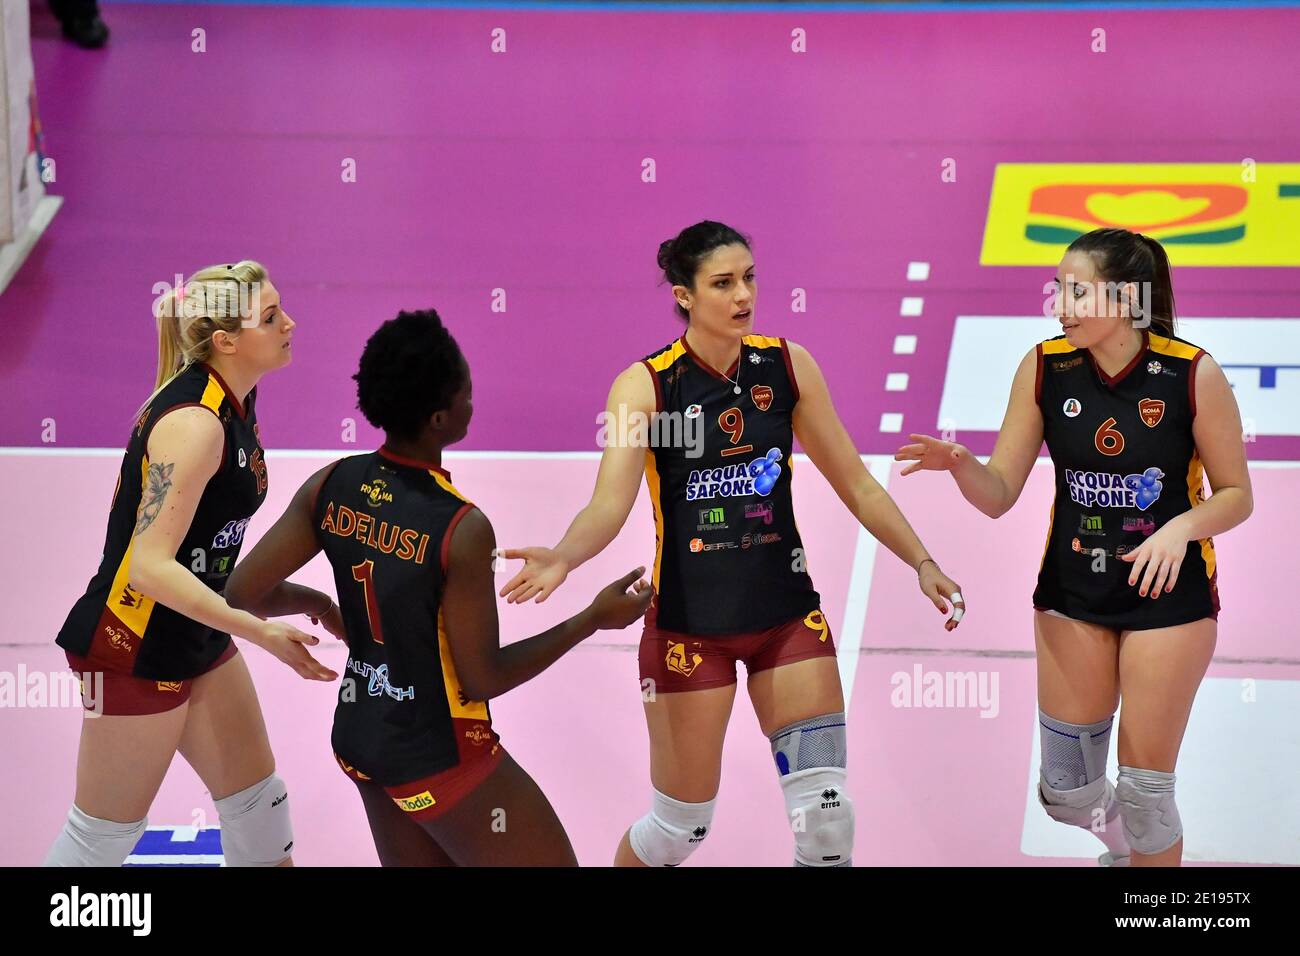 The Acqua & Sapone Roma Volley Club continues its winning march by confirming itself as the leaders of the Western Group of the A2 Women's Series. The Capitoline team, in fact, took home another three points against Exacer Montale proving once again that they are the battleship to beat. A team victory as demonstrated by tonight's scorers with six players in double figures. For the team of coach Tamburello to underline the good performance of Boratelli who closed the match with 22 points on the scoresheet. (Photo by Domenico Cippitelli/Pacific Press) Stock Photo